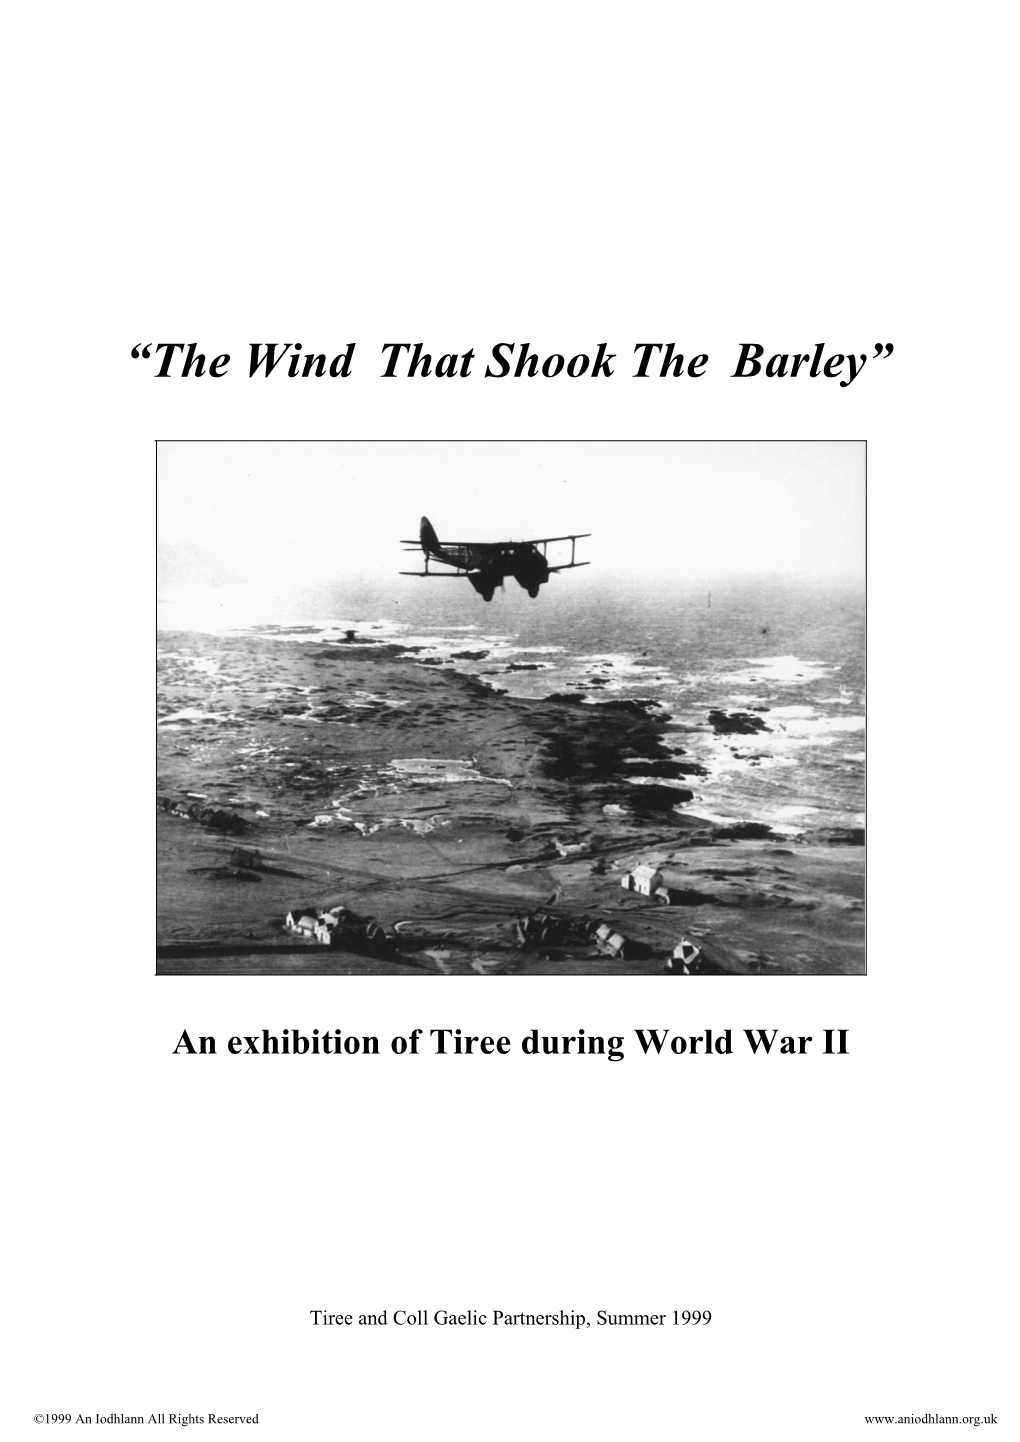 The Wind That Shook the Barley: the History of Tiree During the Second